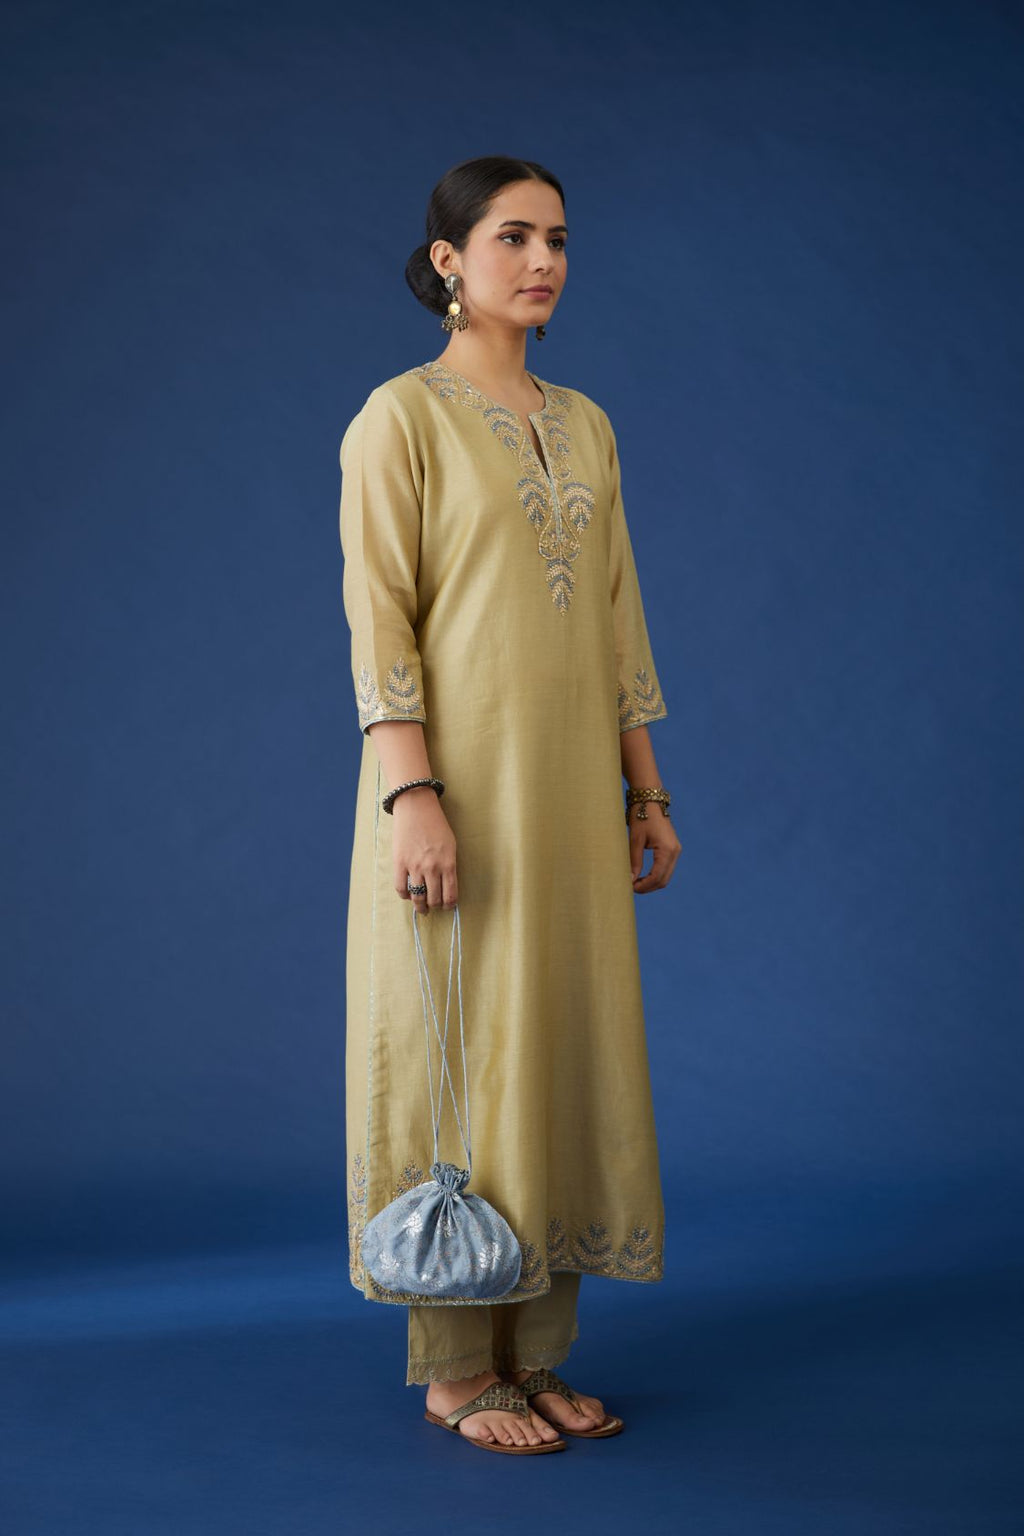 Olive silk chanderi straight kurta set with contrast silk thread and gota embroidery at neck and hem, highlighted with bead work.